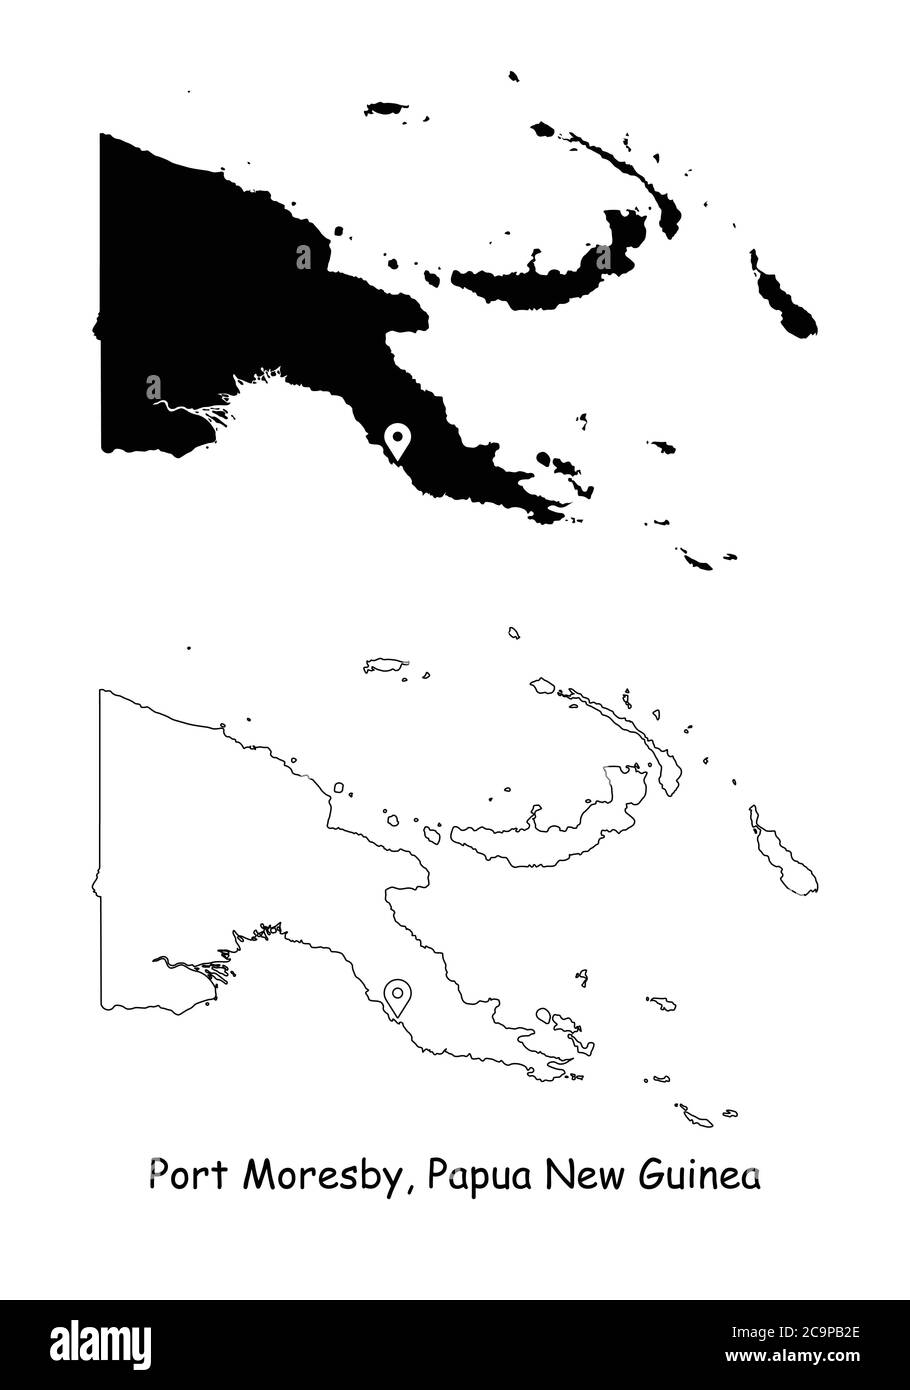 Port Moresby, Papua New Guinea. Detailed Country Map with Location Pin on Capital City. Black silhouette and outline maps isolated on white background Stock Vector